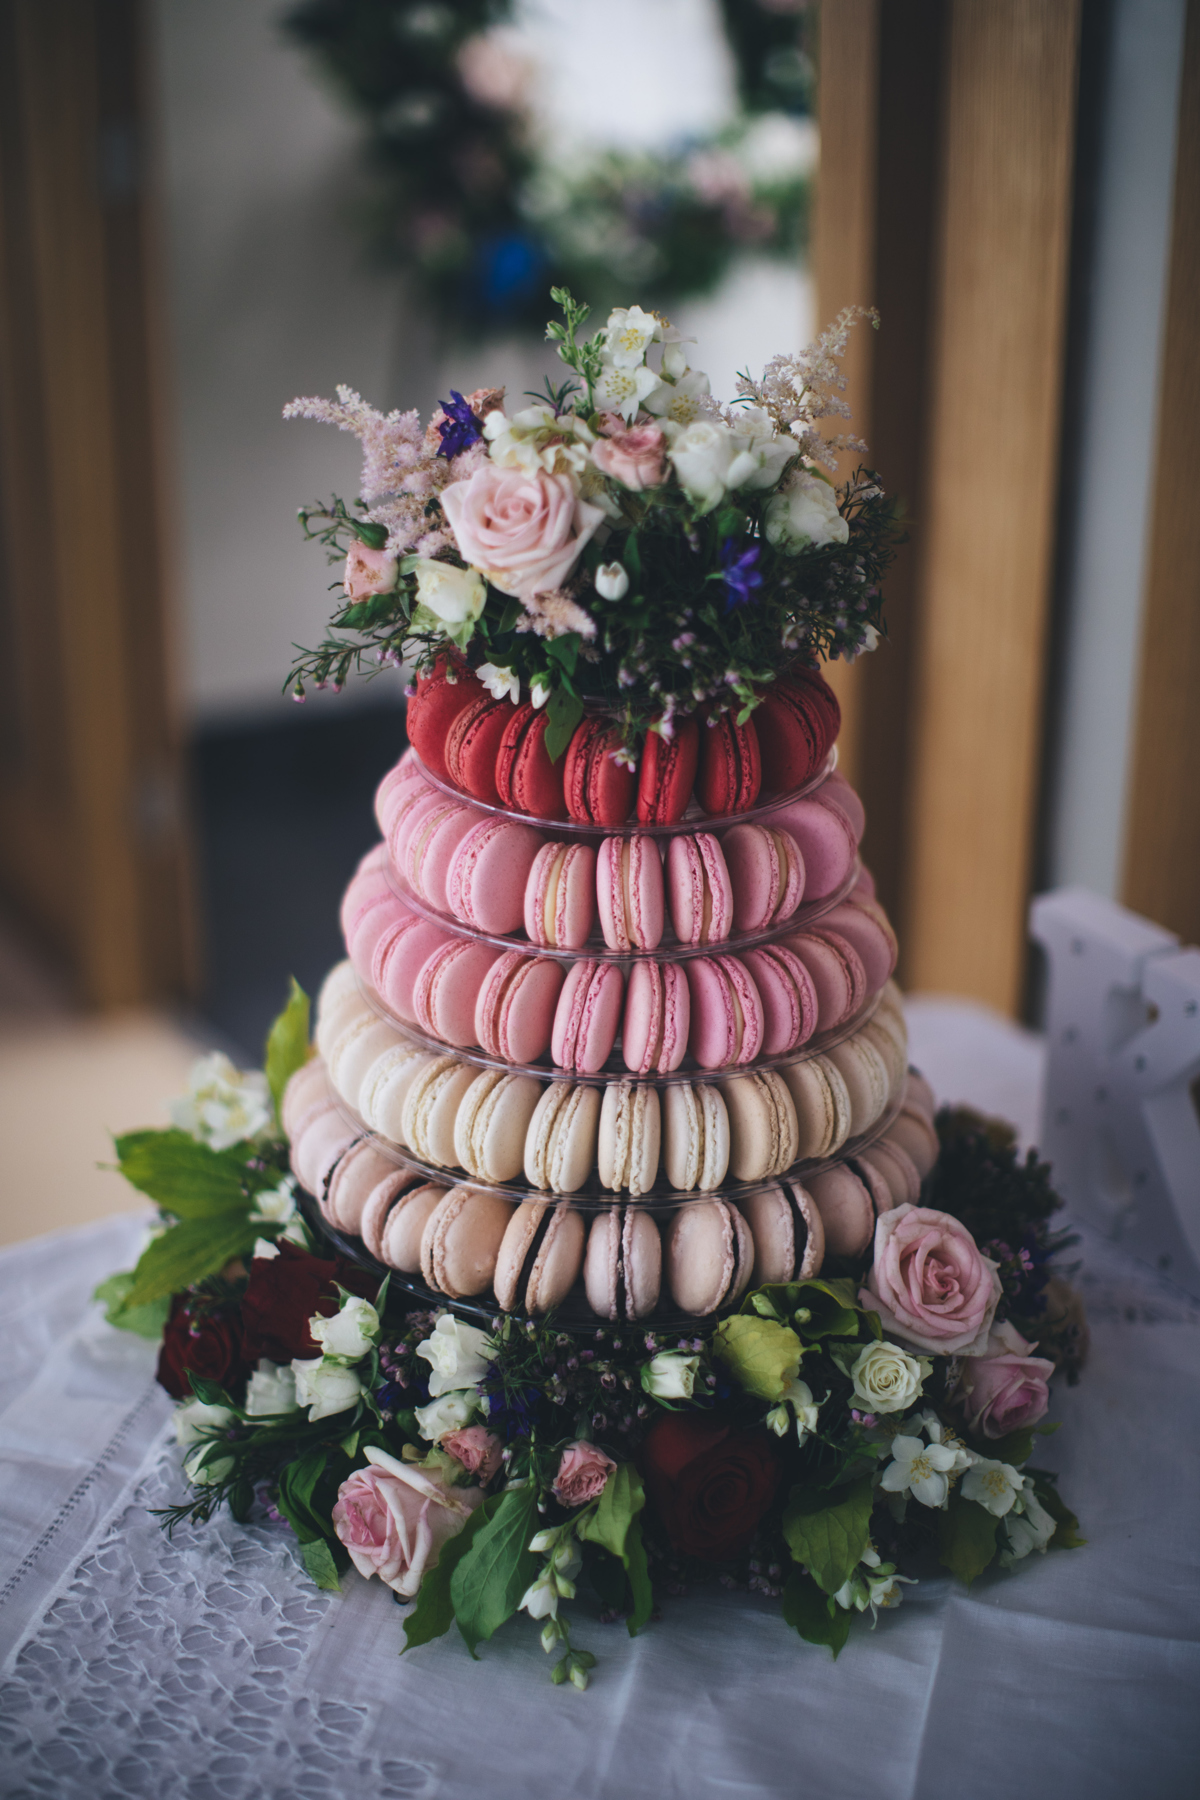 Wedding cake made up of five tiers of Macarons in pink hues from red to cream with flowers around the base and on top